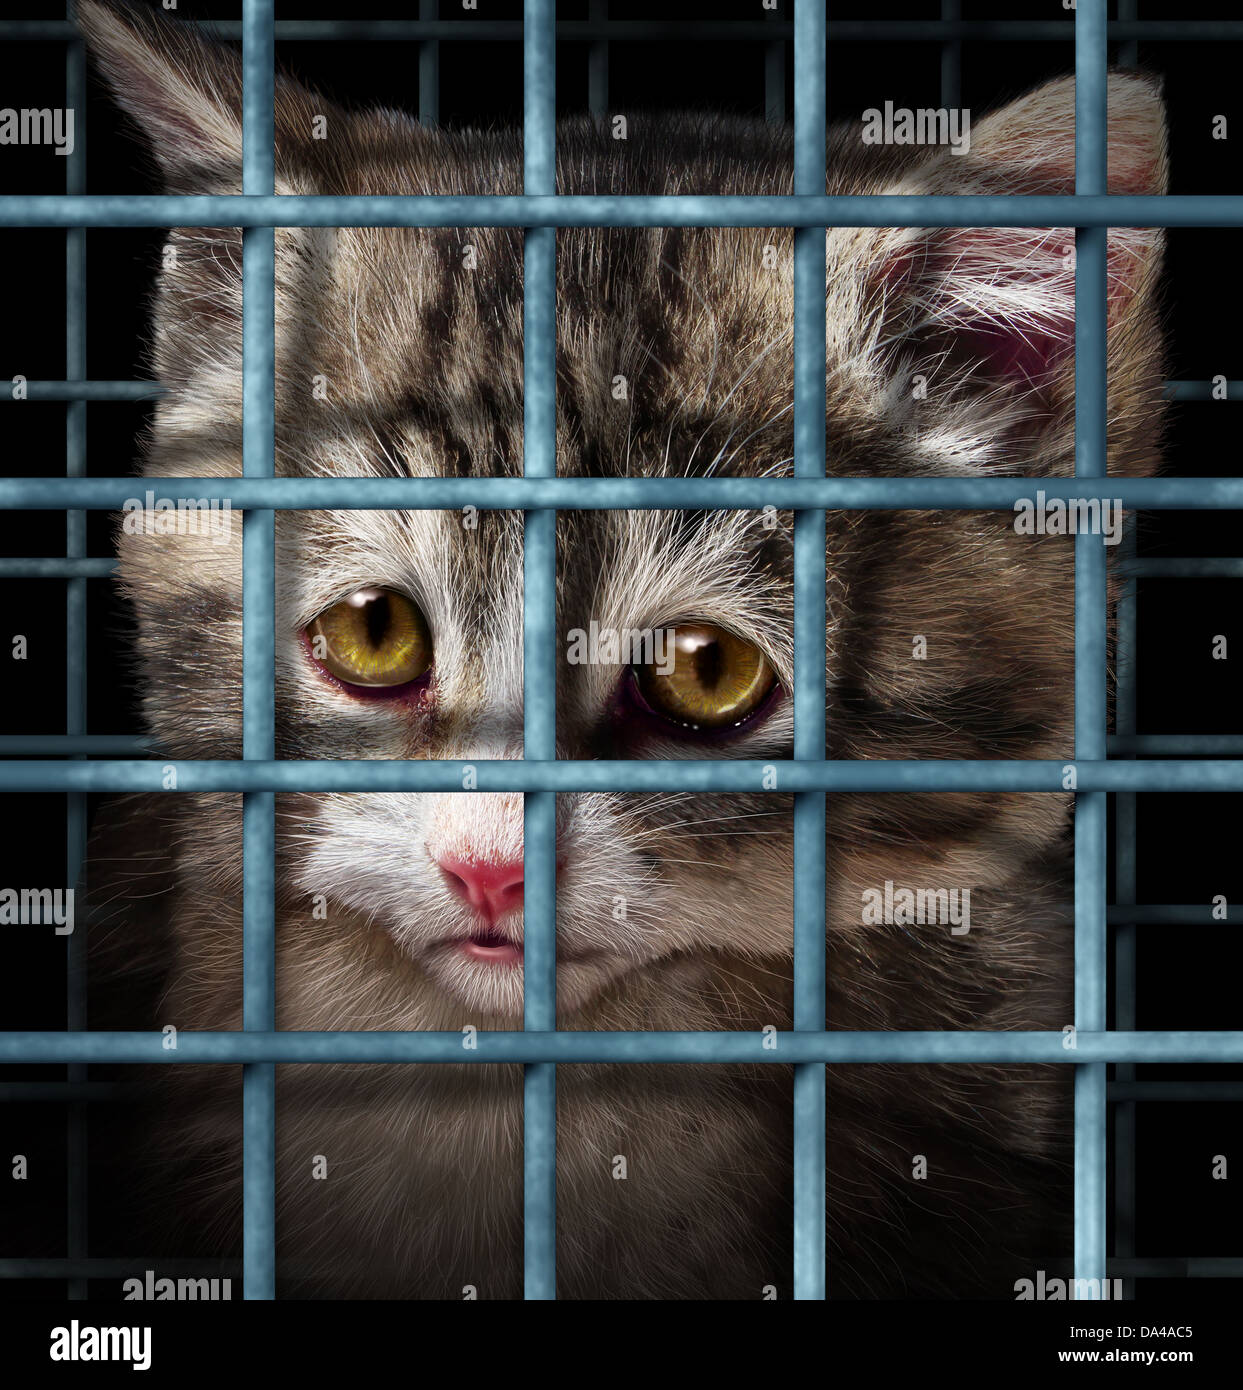 Pet adoption concept for orphaned and unwanted animals as cats or dogs caged in a shelter for pets represented by a sad cute kitten behind metal prison bars. Stock Photo